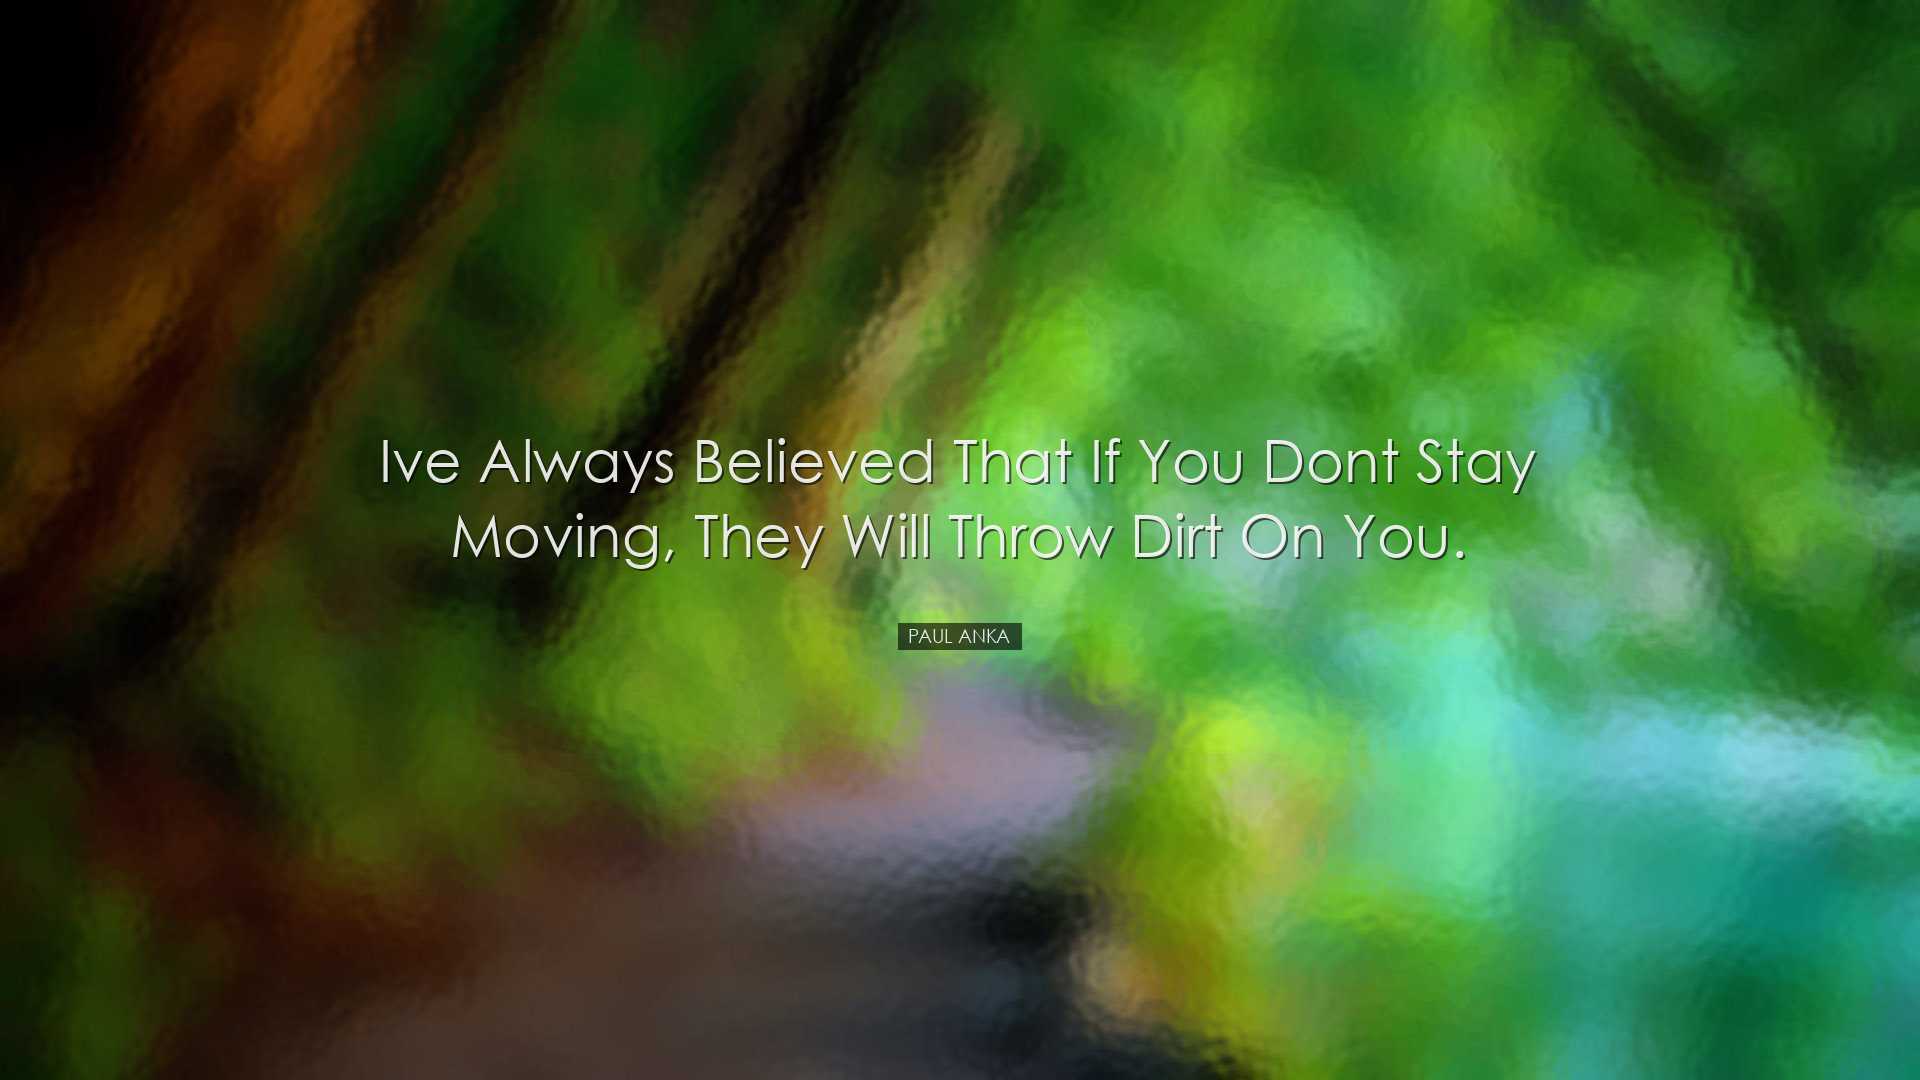 Ive always believed that if you dont stay moving, they will throw